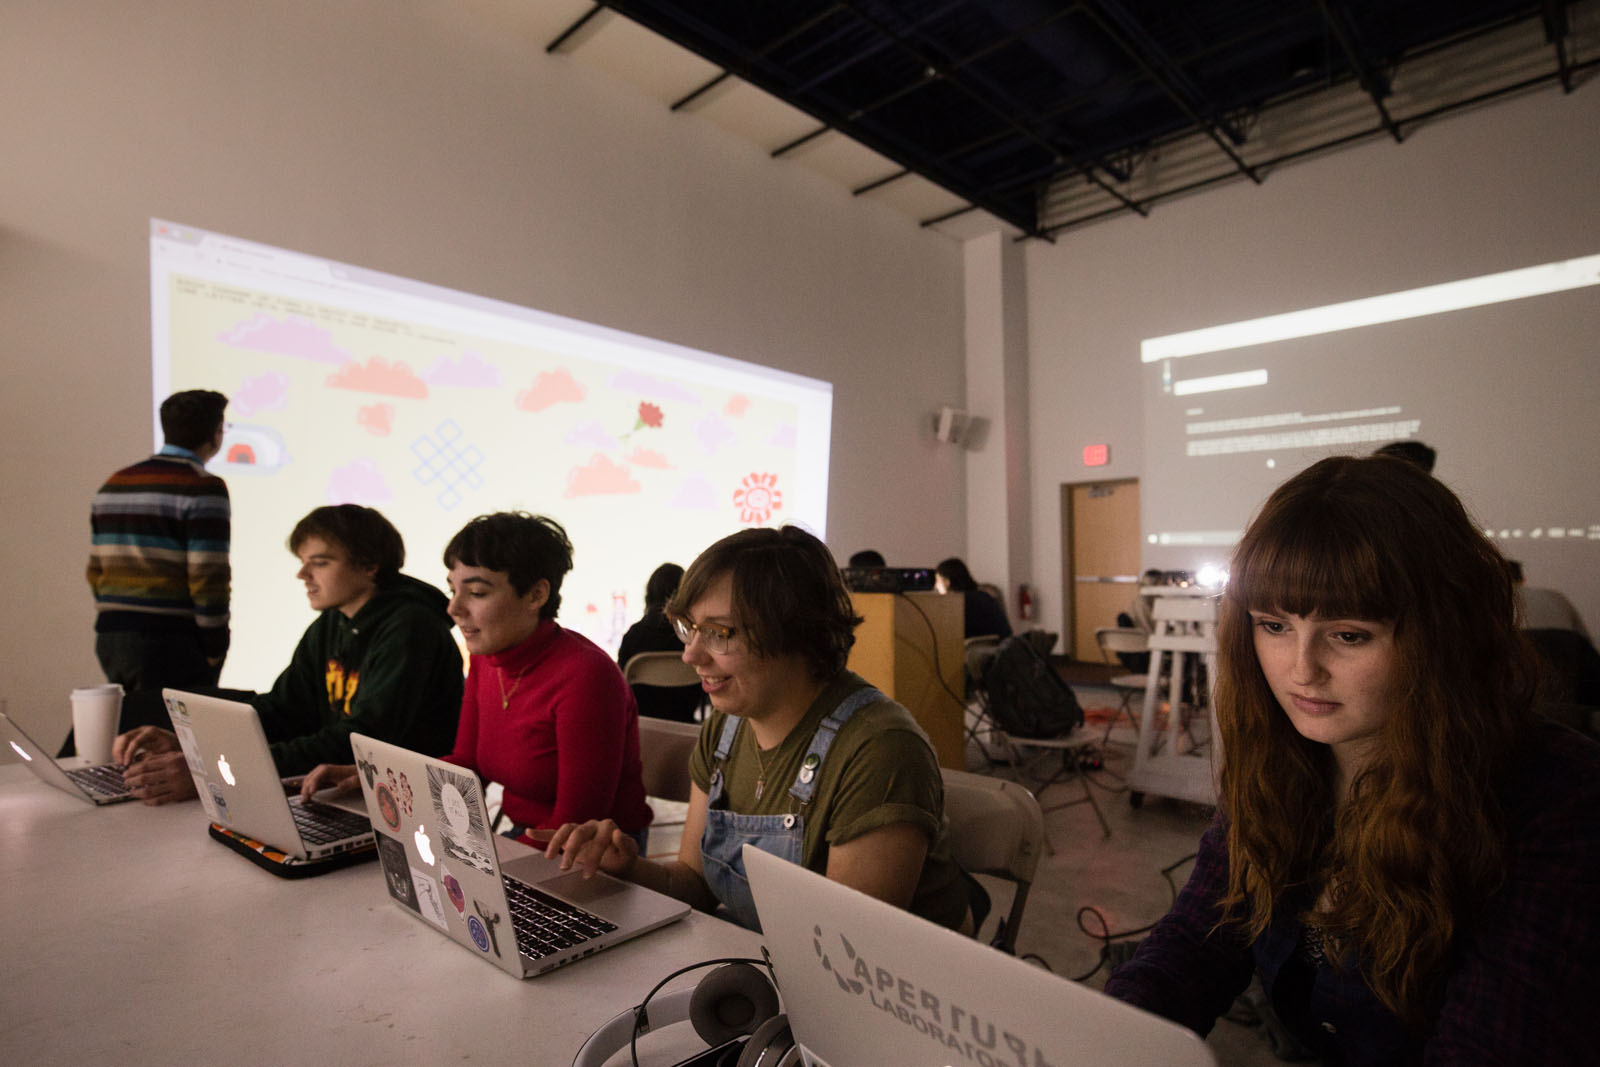 Bard College Creates New Digital Media Studio Supported by Gift From Cornelia and Michael Bessie Foundation&nbsp;